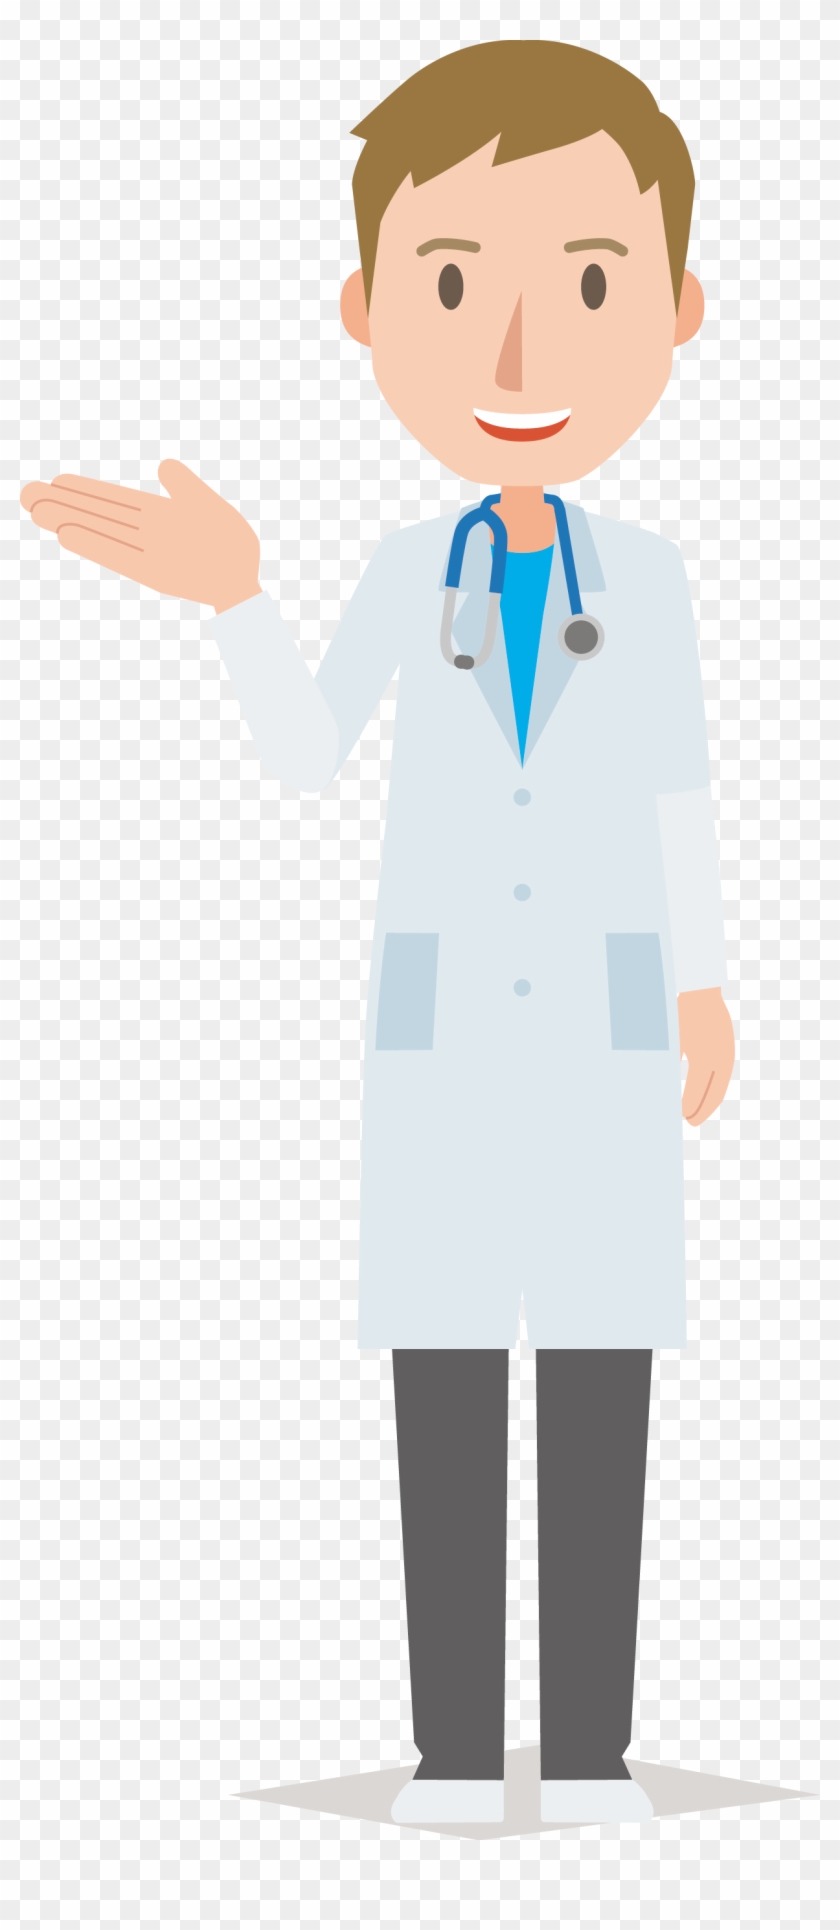 Newborn Doctor Physician Cartoon - Man Doctor Icon Png #1117007